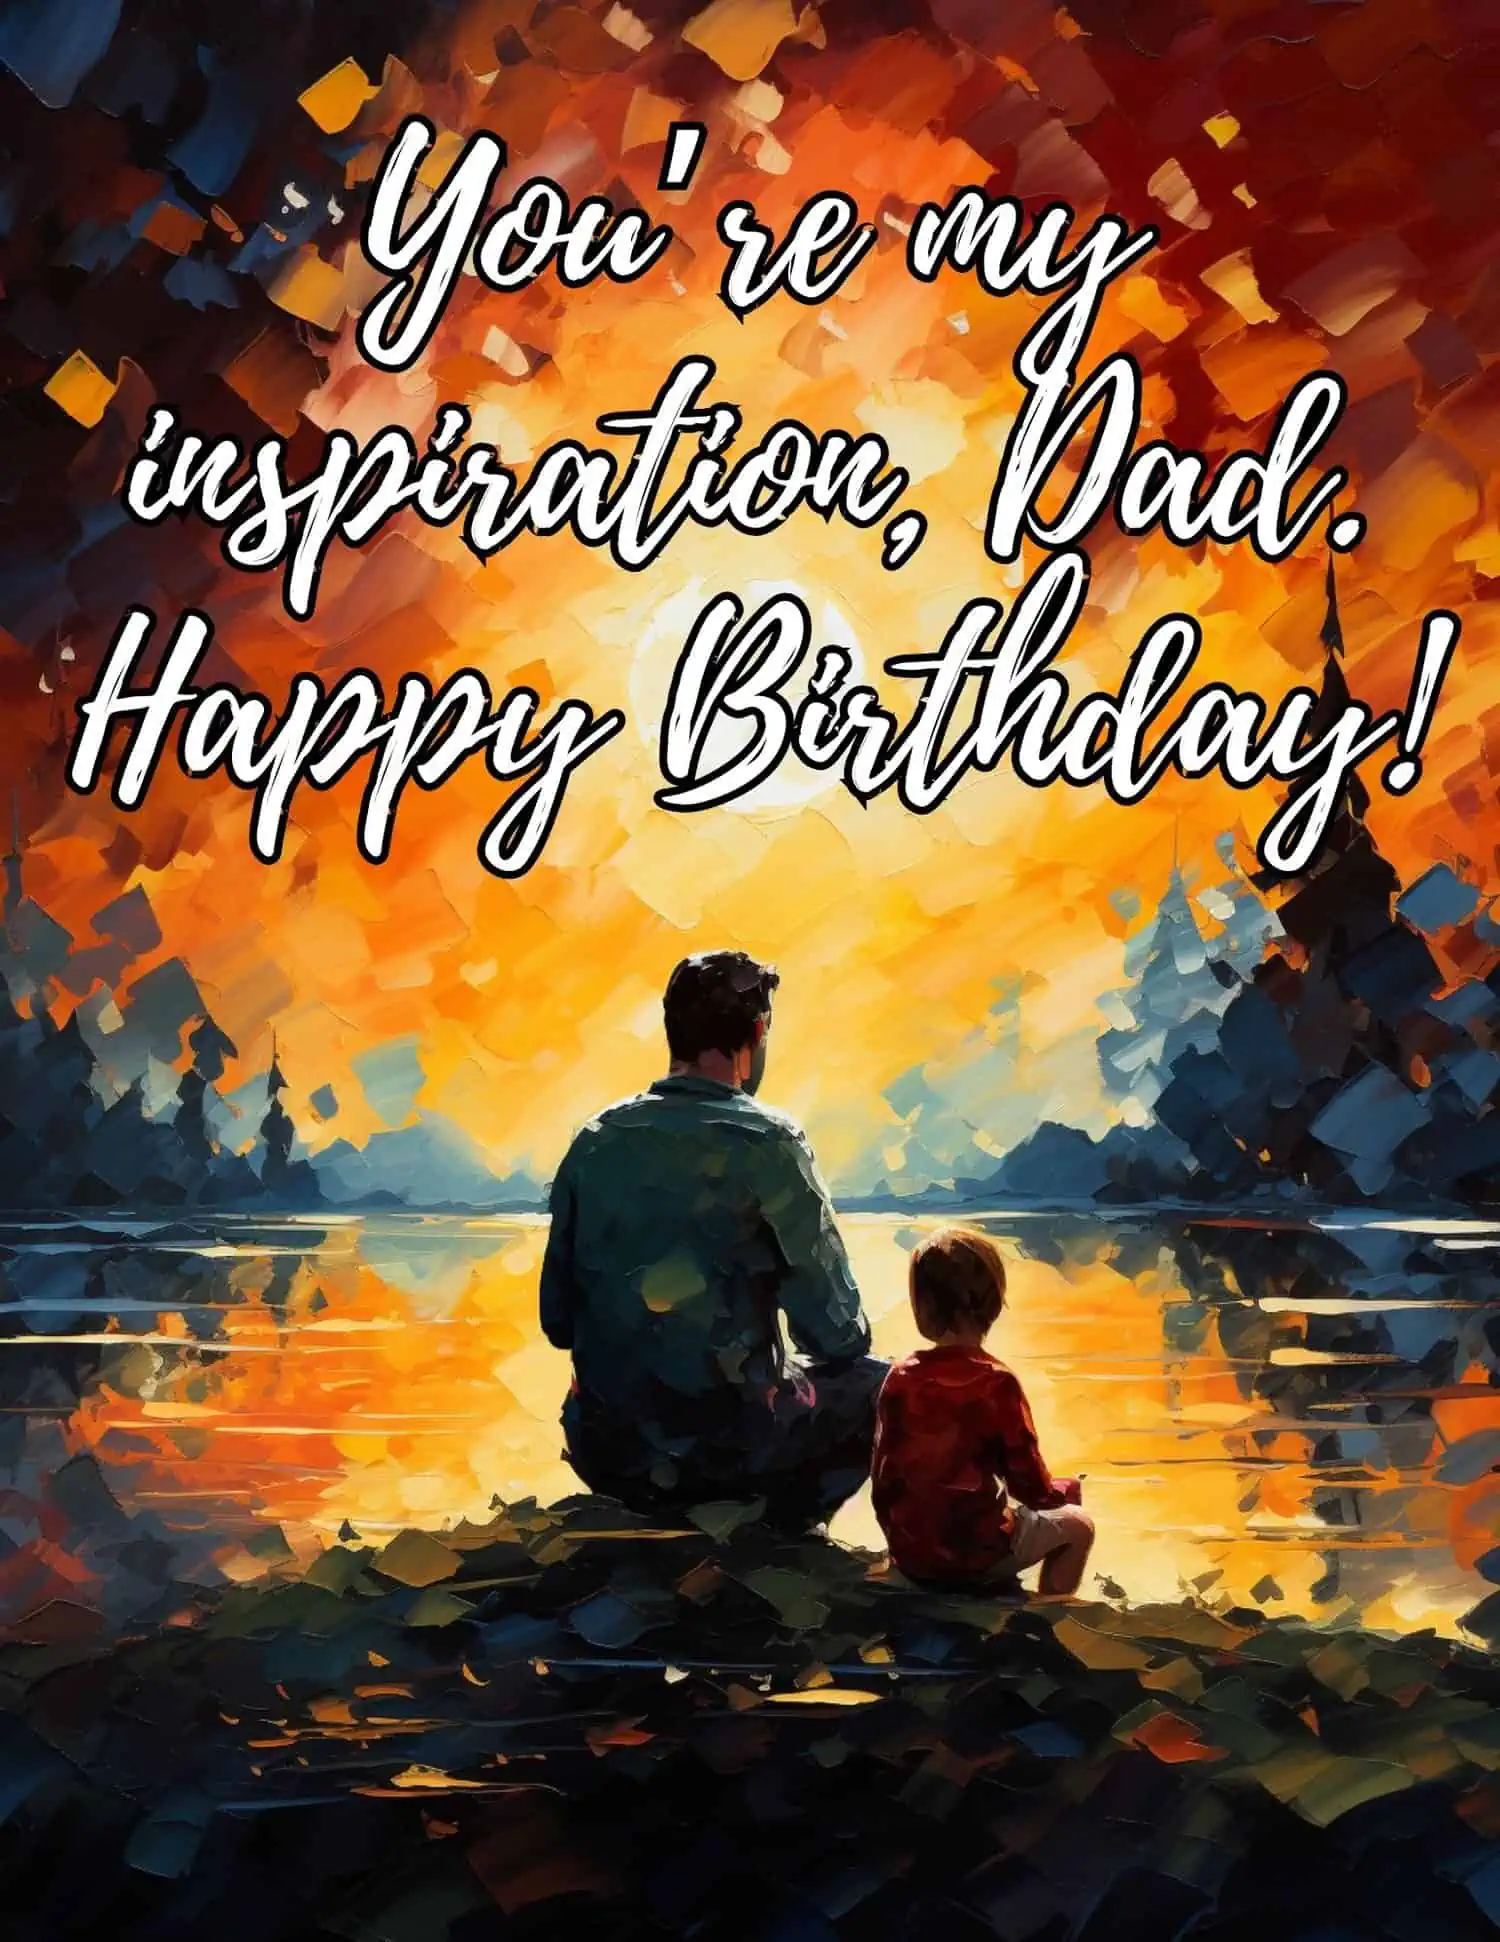 Elaborate and heartfelt birthday wishes for your father.